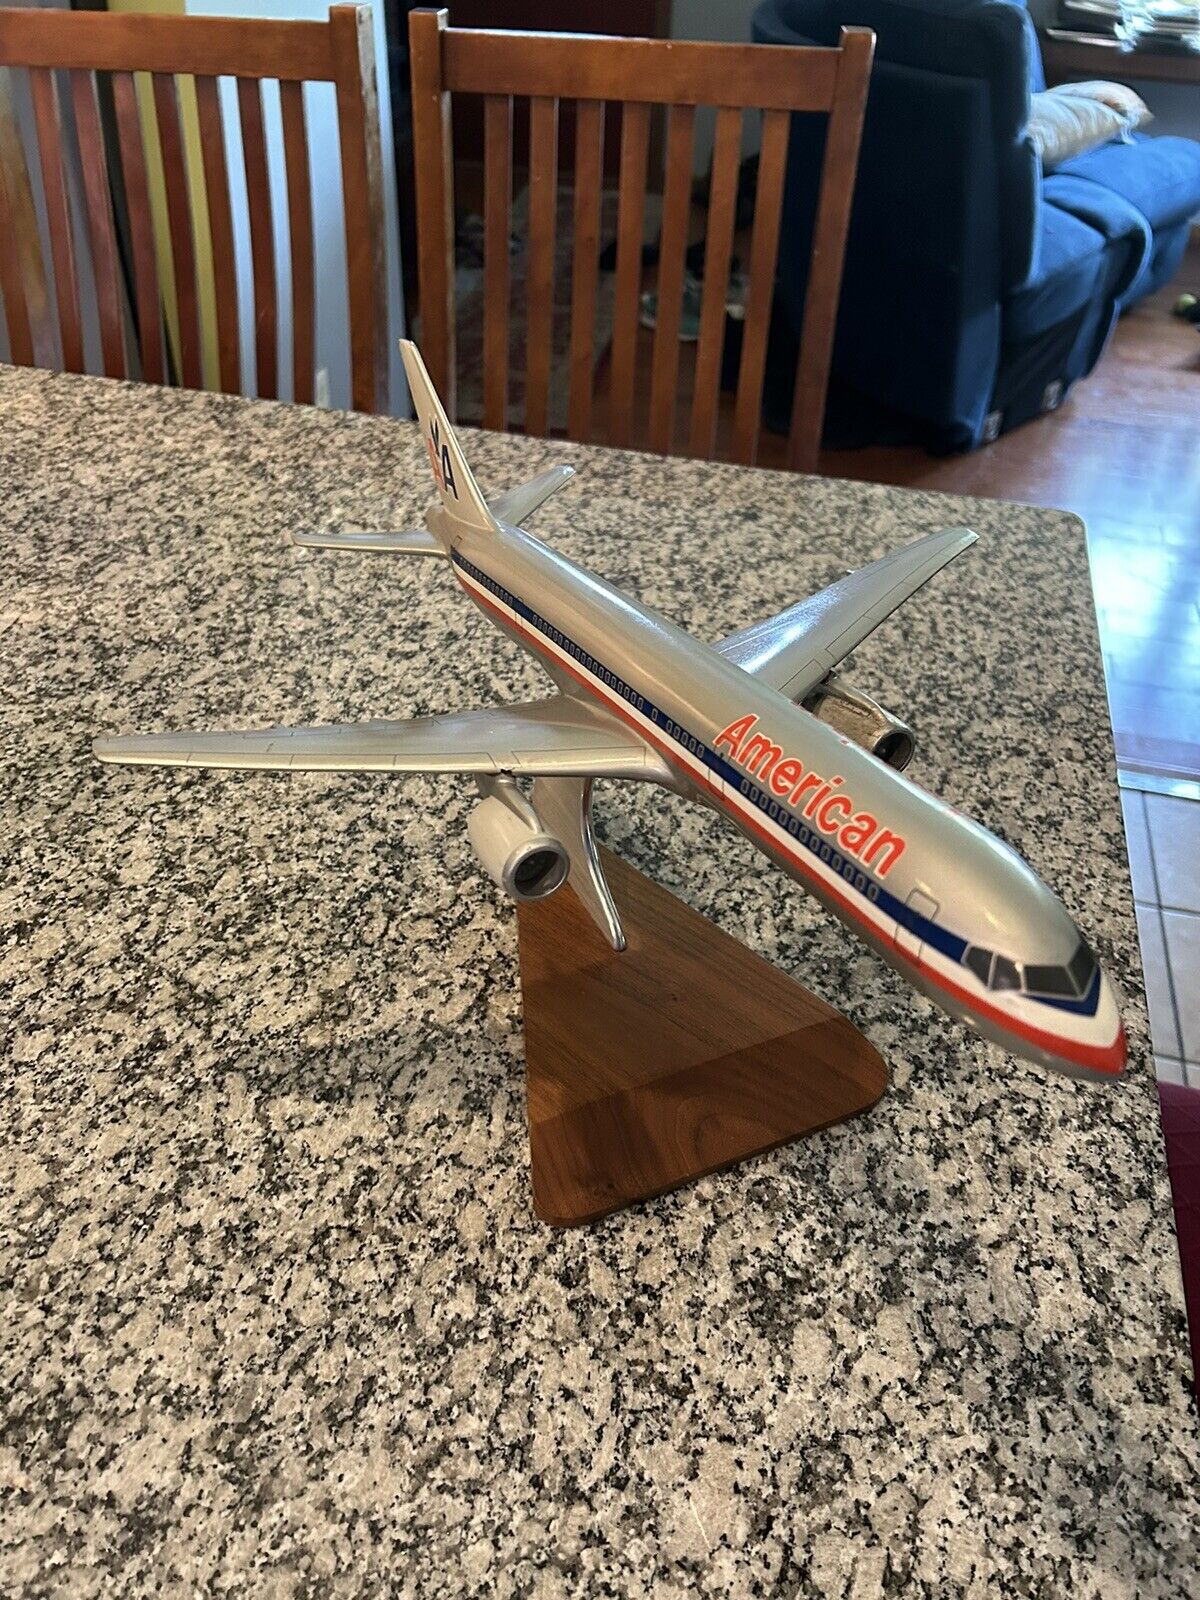 American Airlines Boeing 777-200 Old Livery Desk Display Model 1/100 SC Airplane